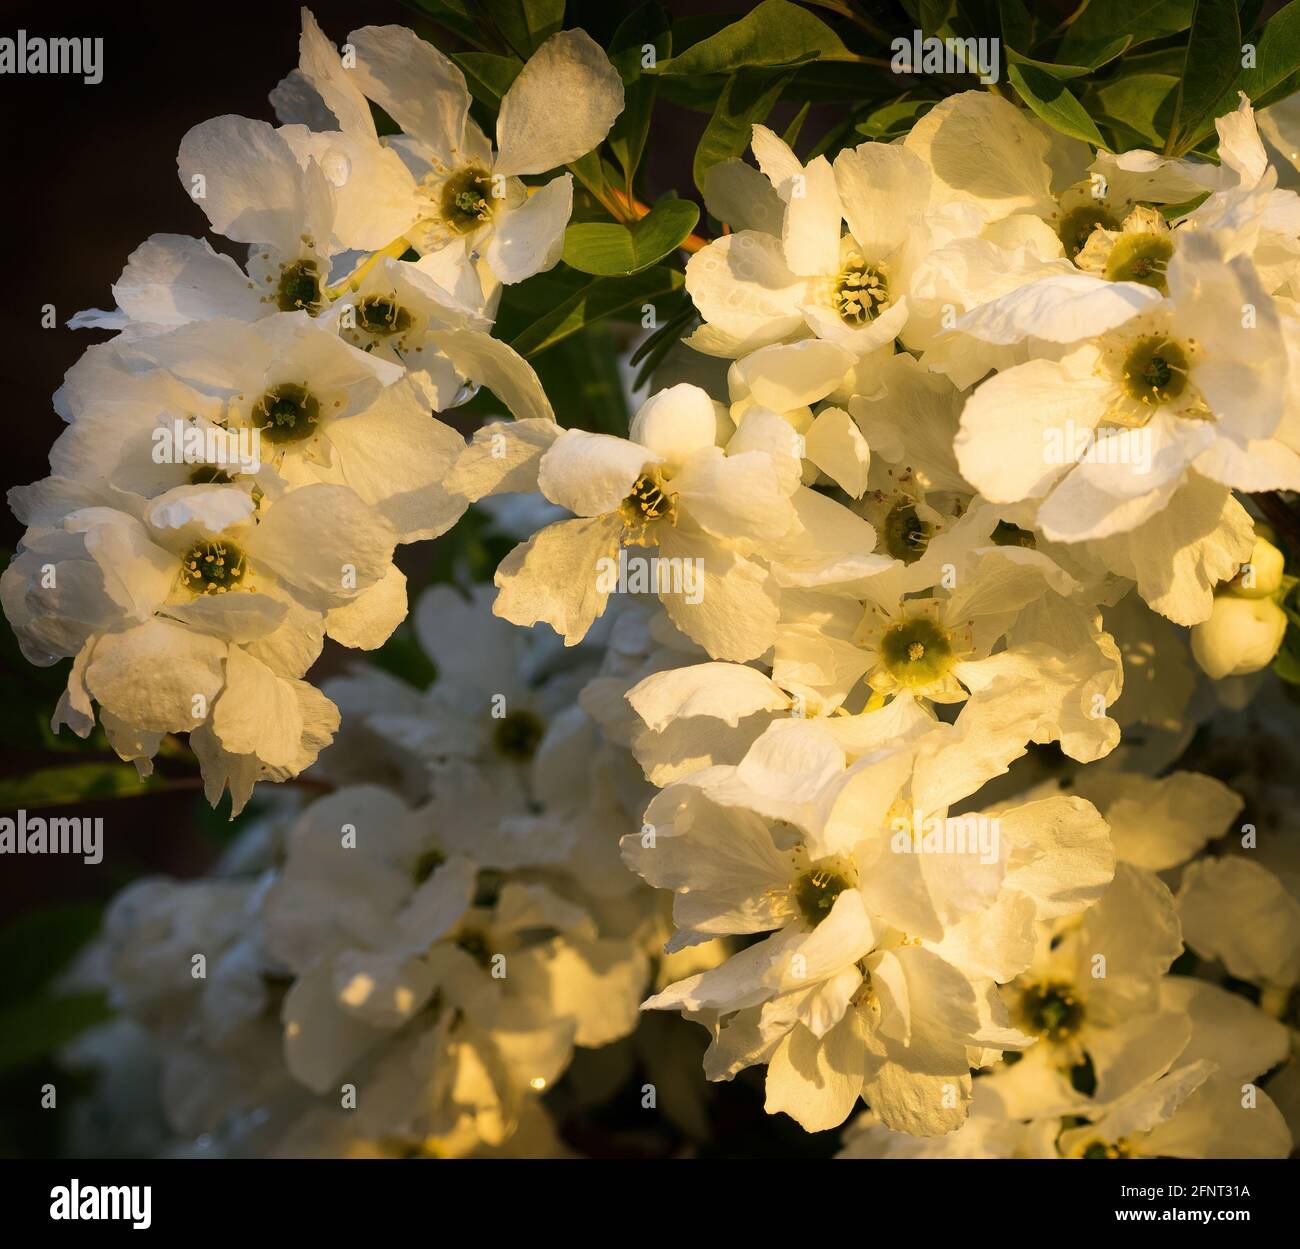 Early evening sunlight catching the blossom of Exochorda × macrantha, commonly known as The Bride. Stock Photo